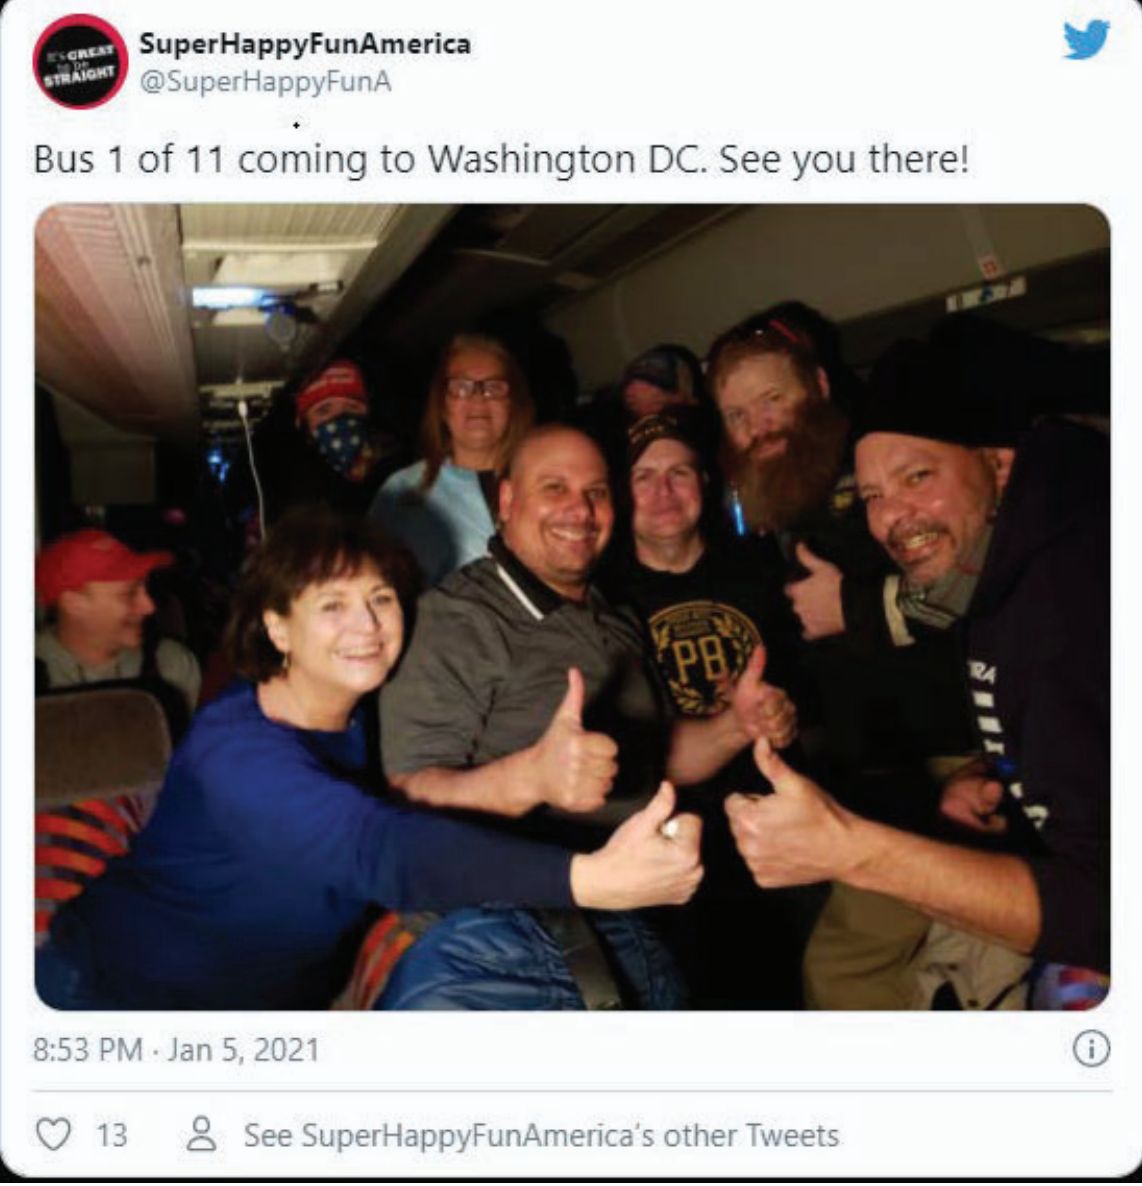 Suzanne Ianni, a member of the Town Meeting in Natick, Massachusetts, left, aboard a bus headed to Washington for the Jan. 6 "March to Save America" rally. She was arrested for breaching the Capitol.